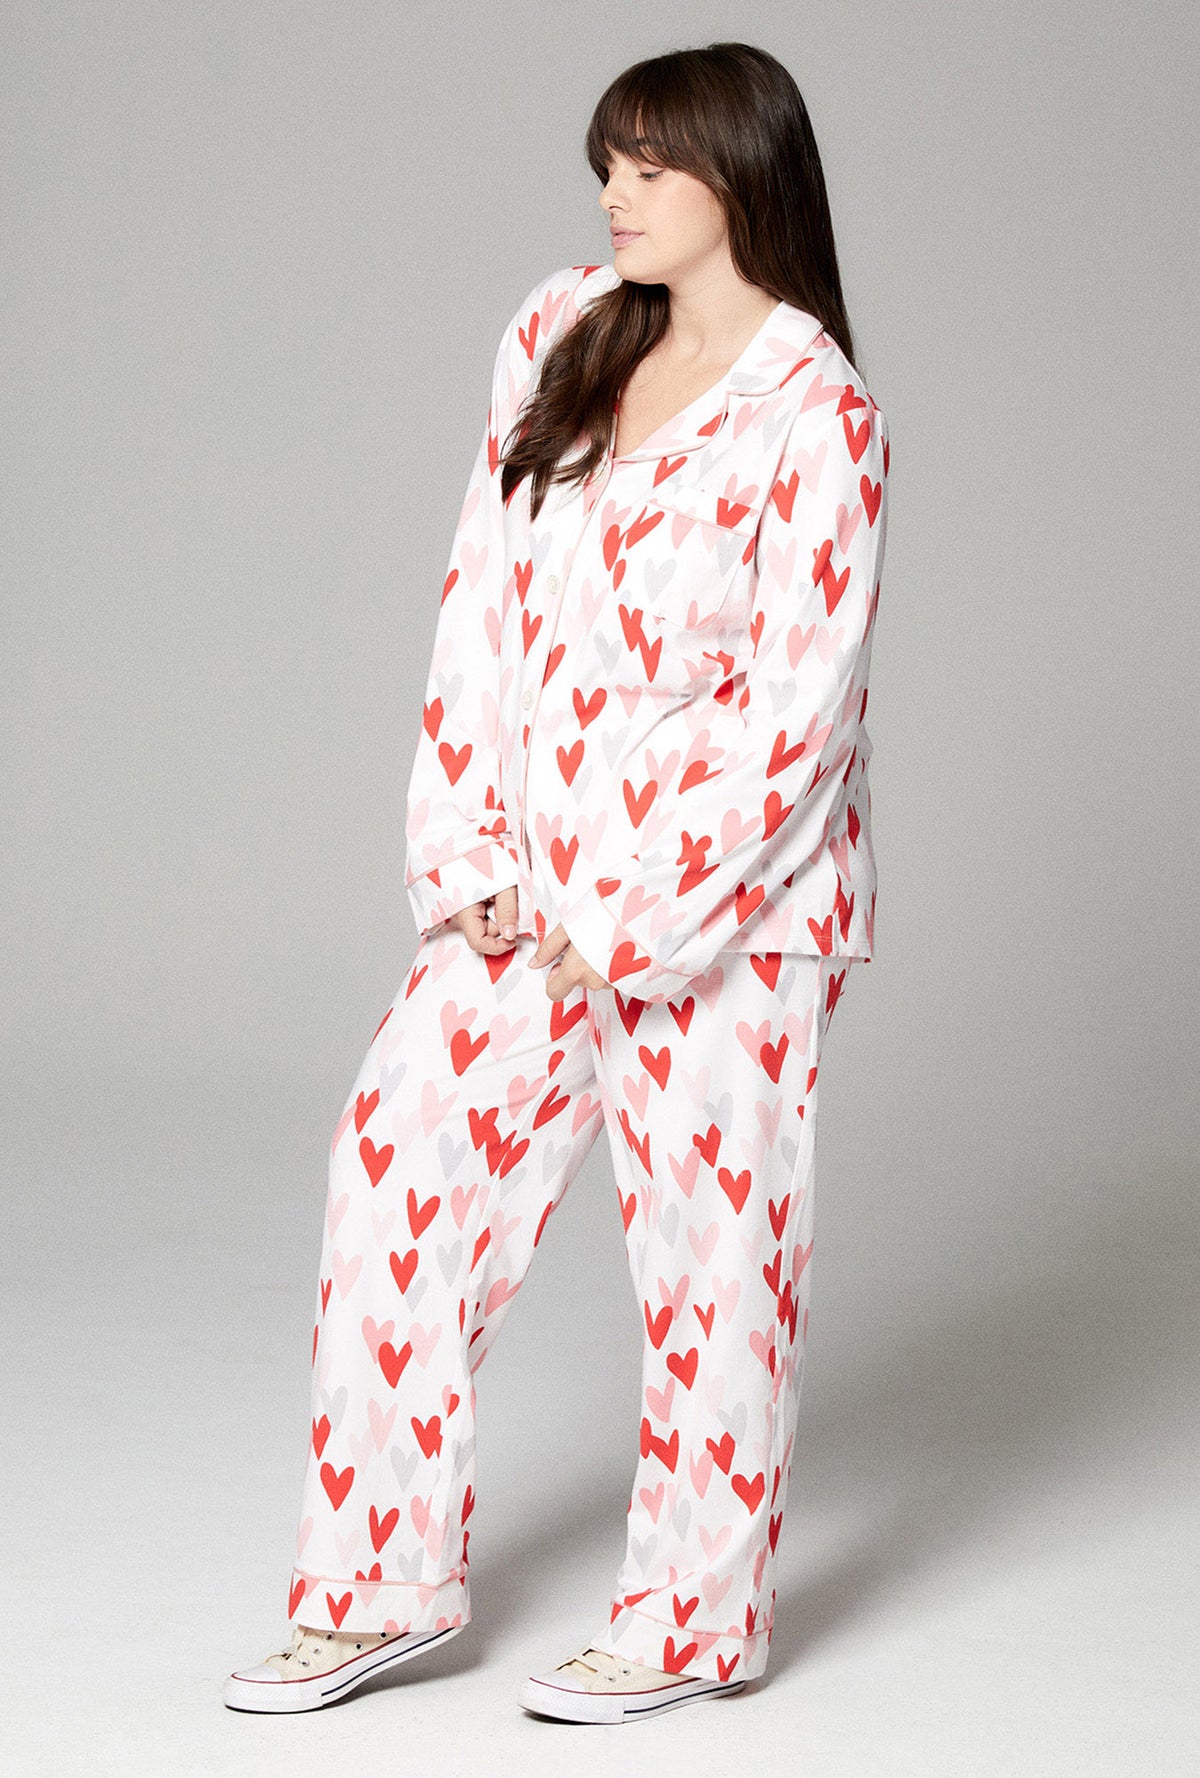 A lady wearing white long sleeve classic stretch jersey pj set with pink and red hearts print